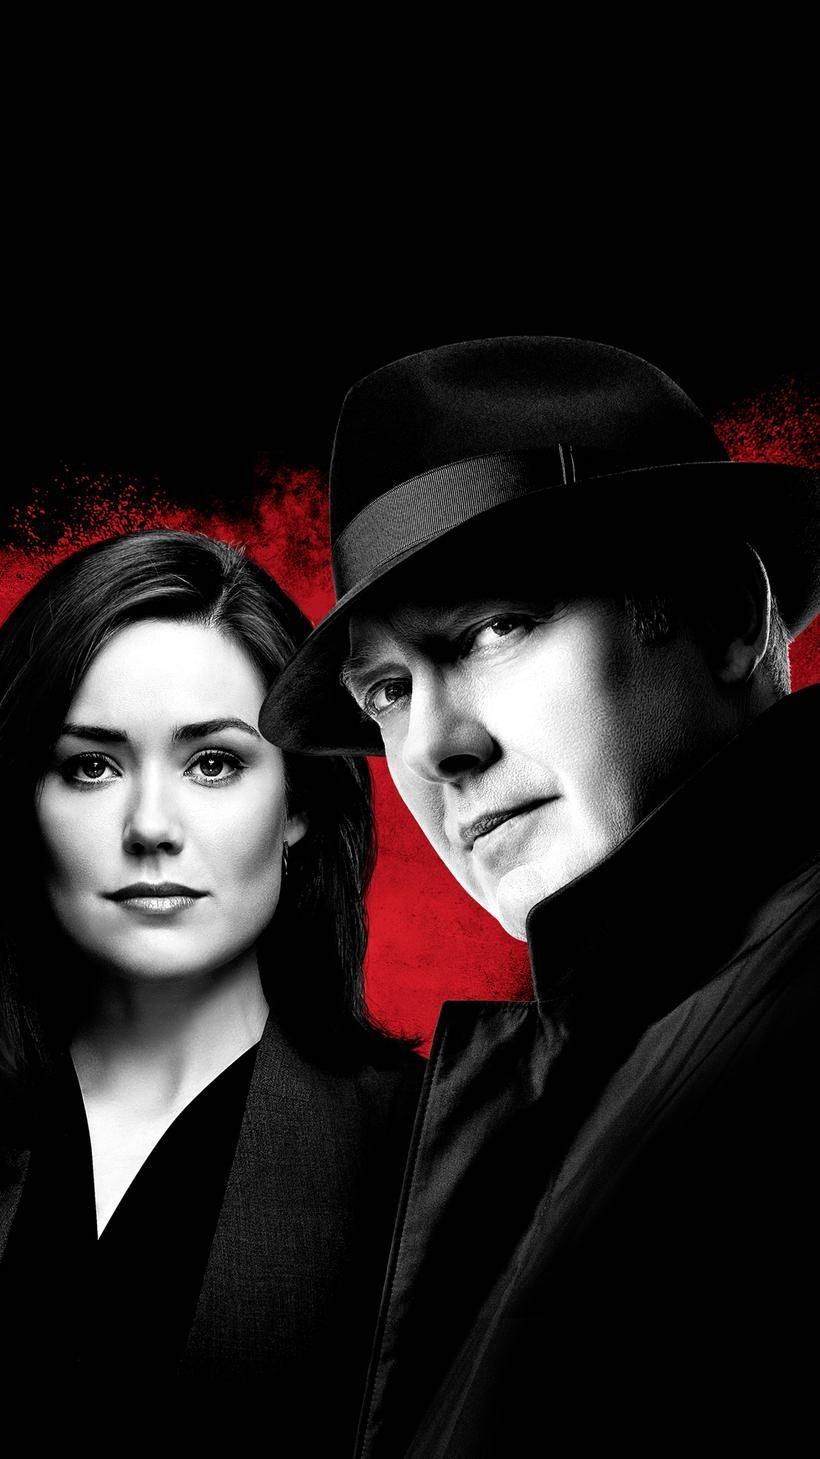 The Blacklist Wallpapers